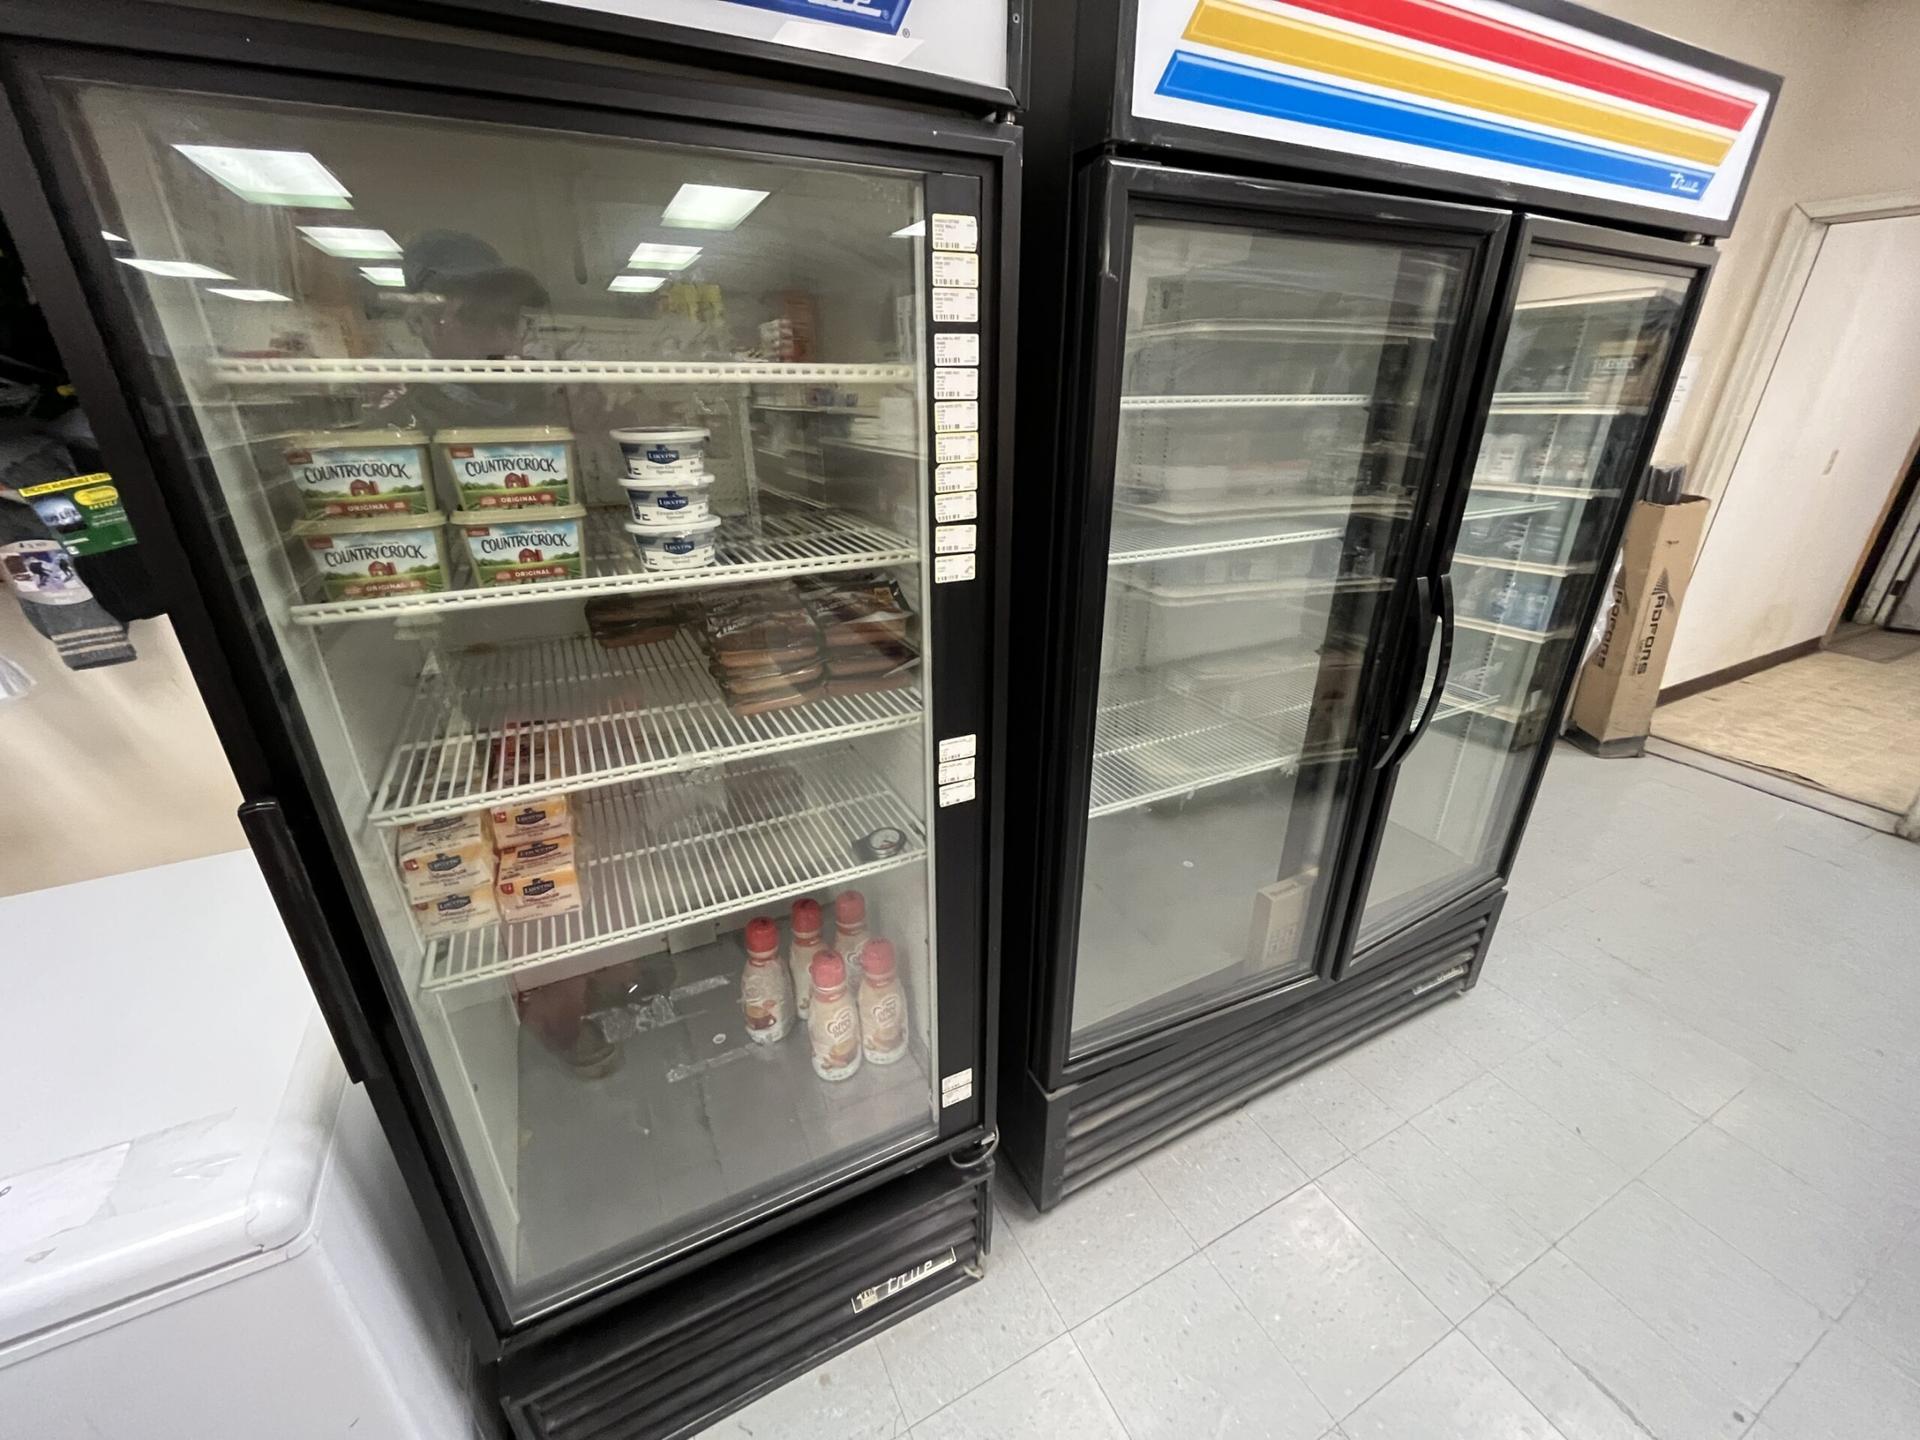 The main store in Teller lacks fresh produce and charges steep prices for groceries, making hunting and fishing essential for the village’s Iñupiaq residents.